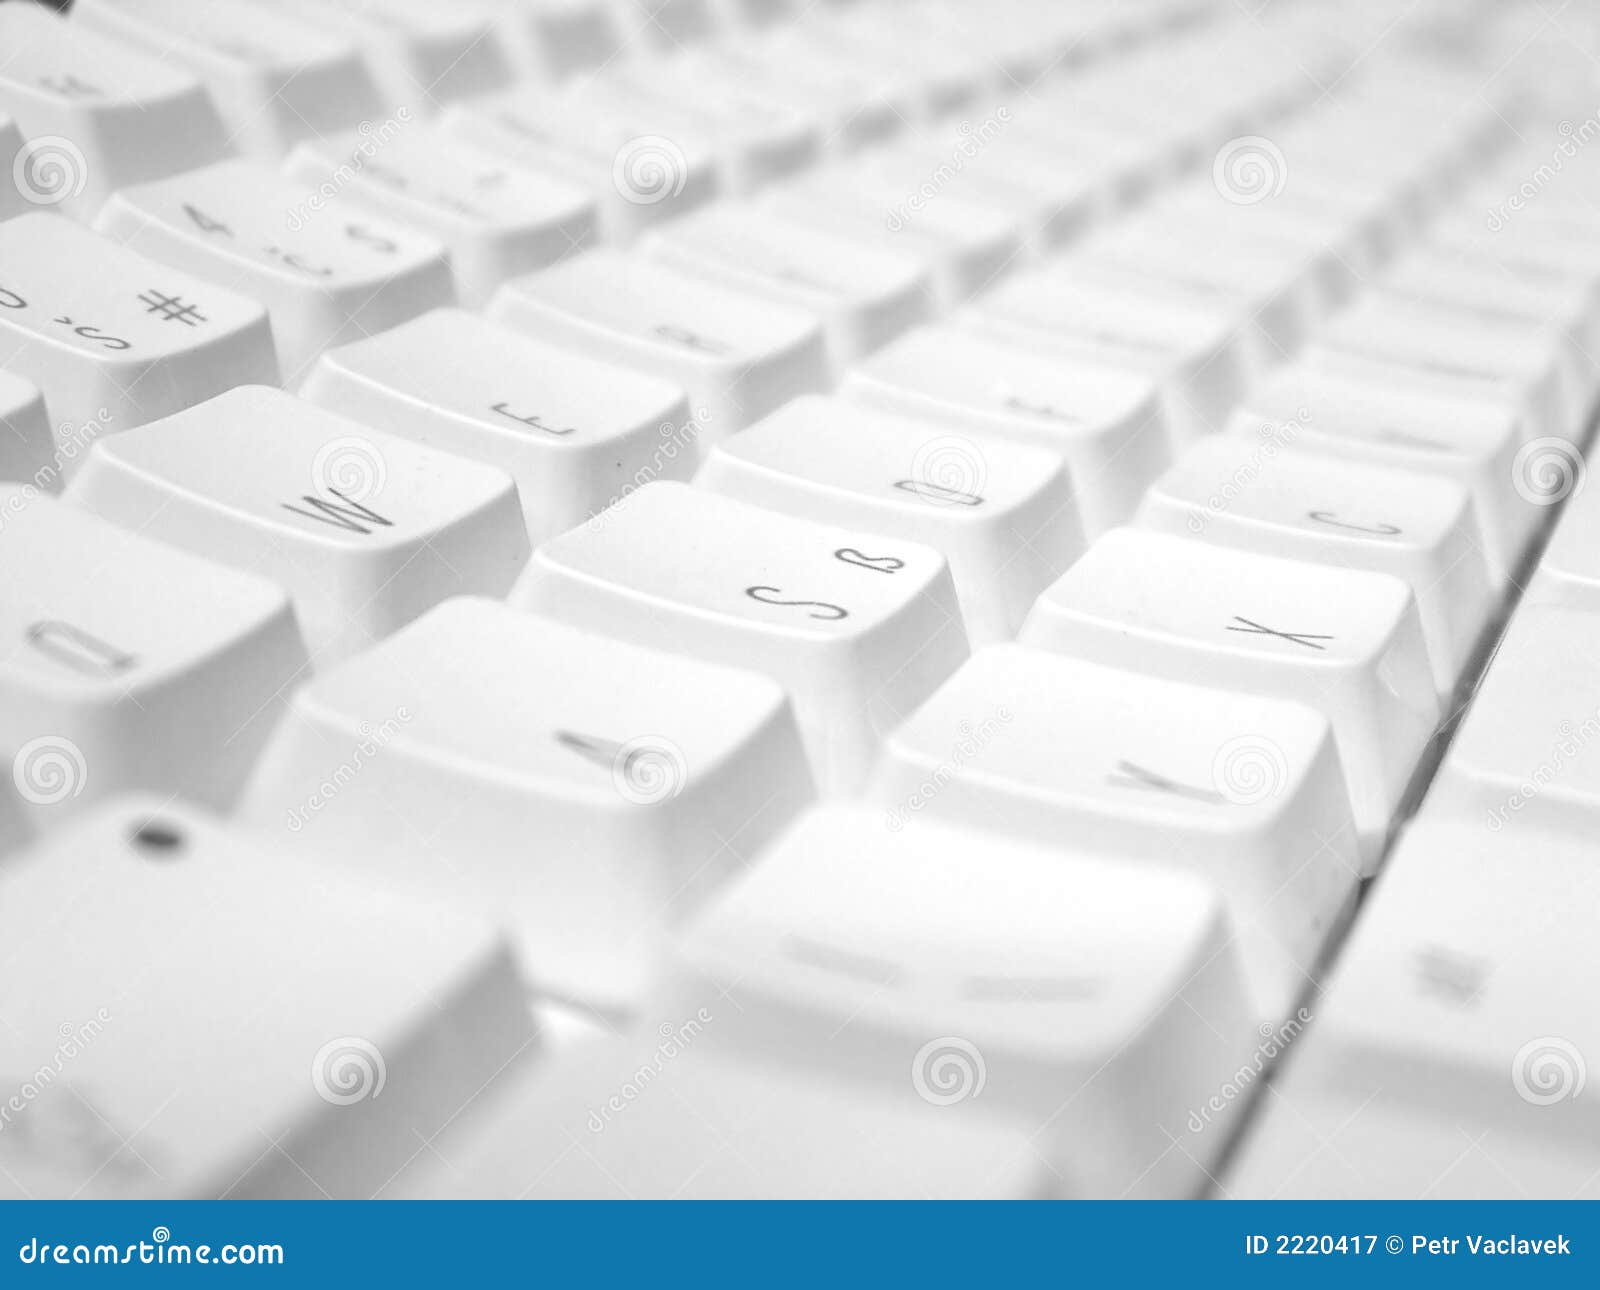 Computer Keyboard Stock Image Image Of Alphabet Button 2220417